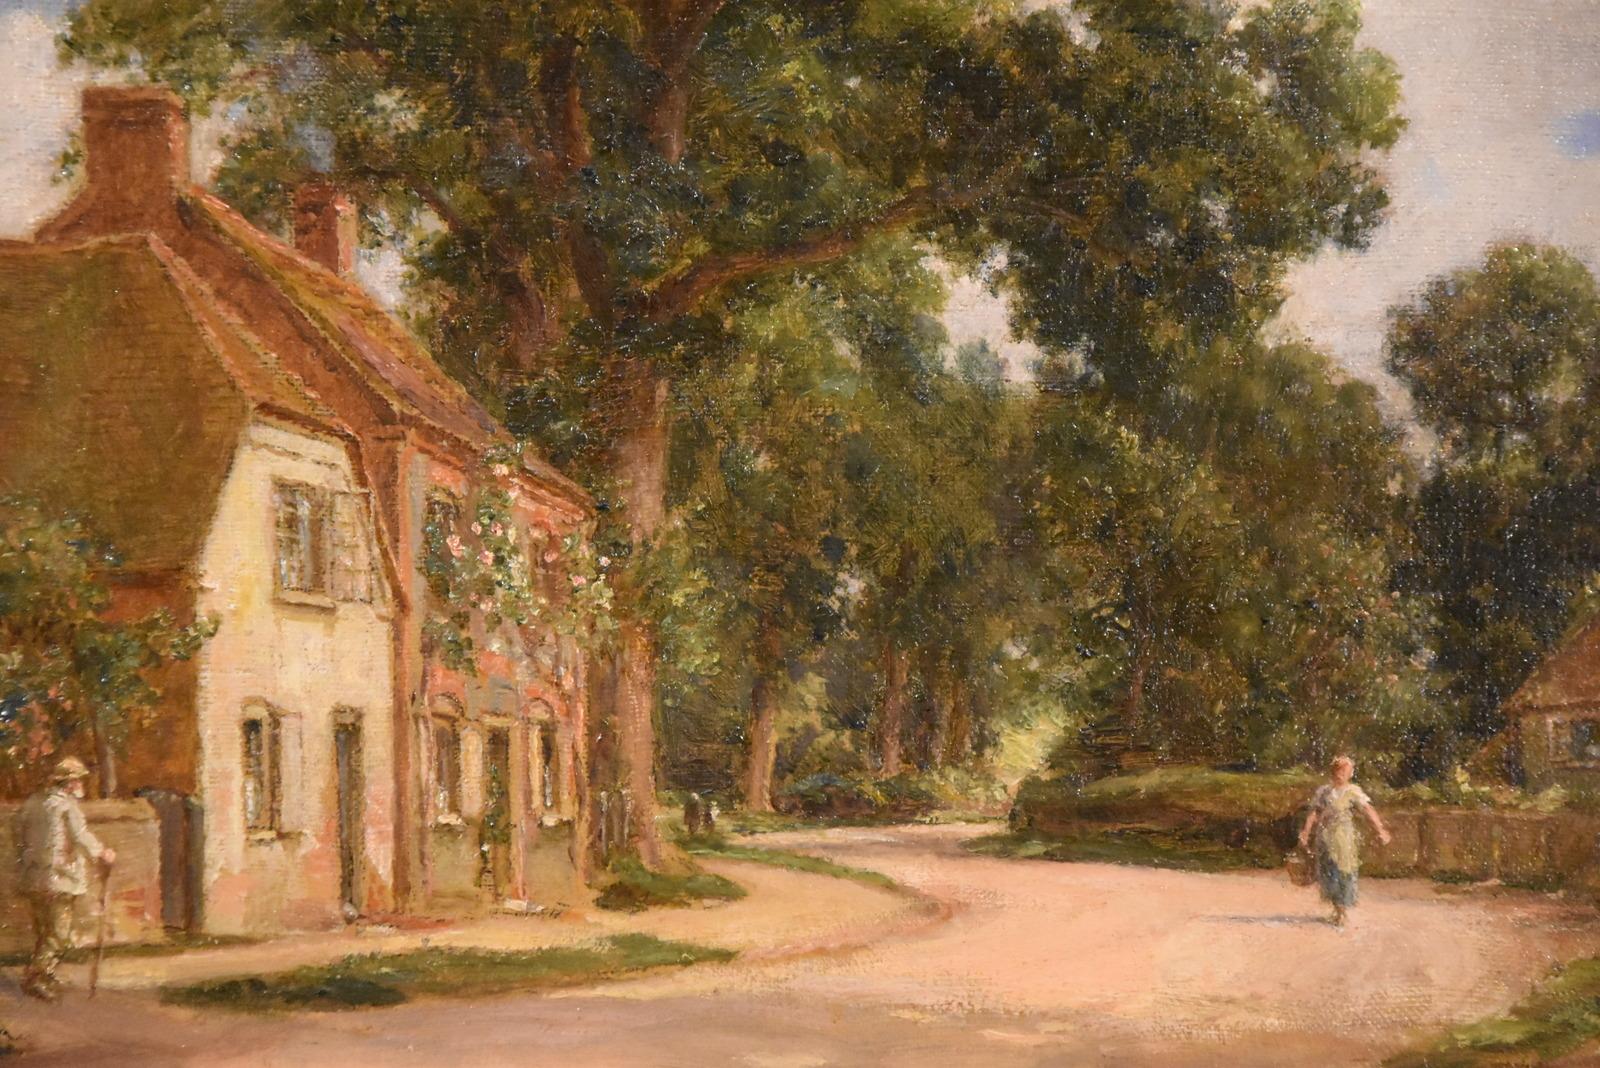 Oil painting Pair by Alfred Kedington Morgan “Village High Street”. Alfred Kedington Morgan A.R.E 1868-1928. Landscape, portrait painter and etcher. Art master at Rugby School. Exhibited at the Royal Academy and society of Etchers (associate member)